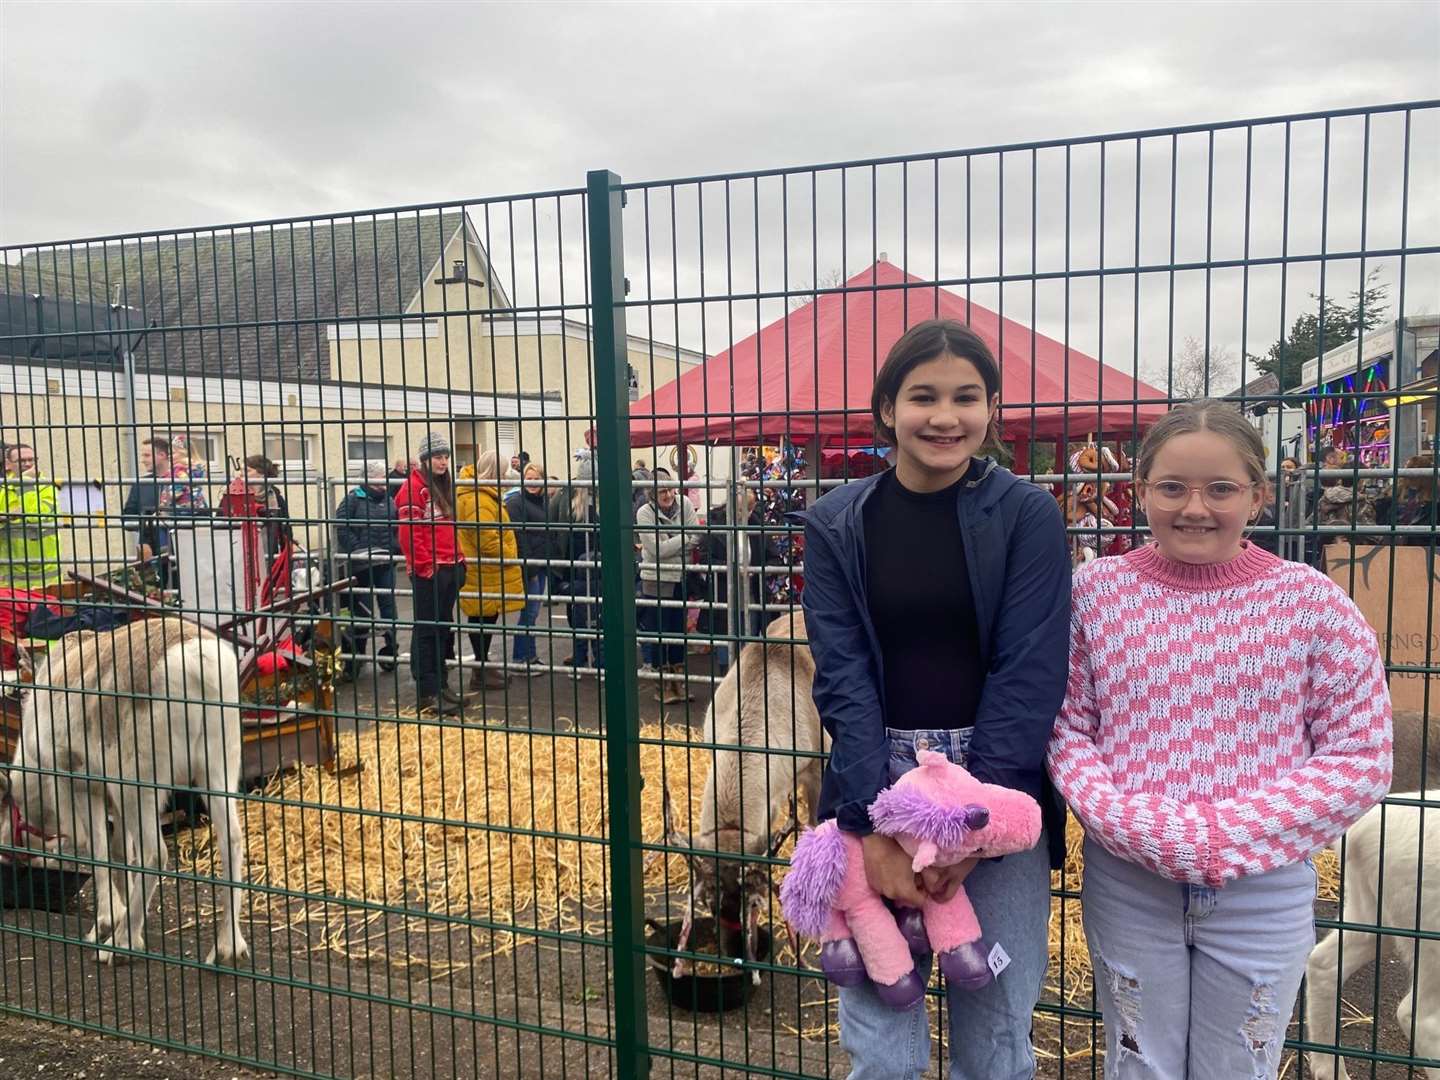 Hannah McLeod and Katie Dick from Lairg were among a large number of local youngsters who made sure to visit the reindeer in their pen at the back of the community centre.